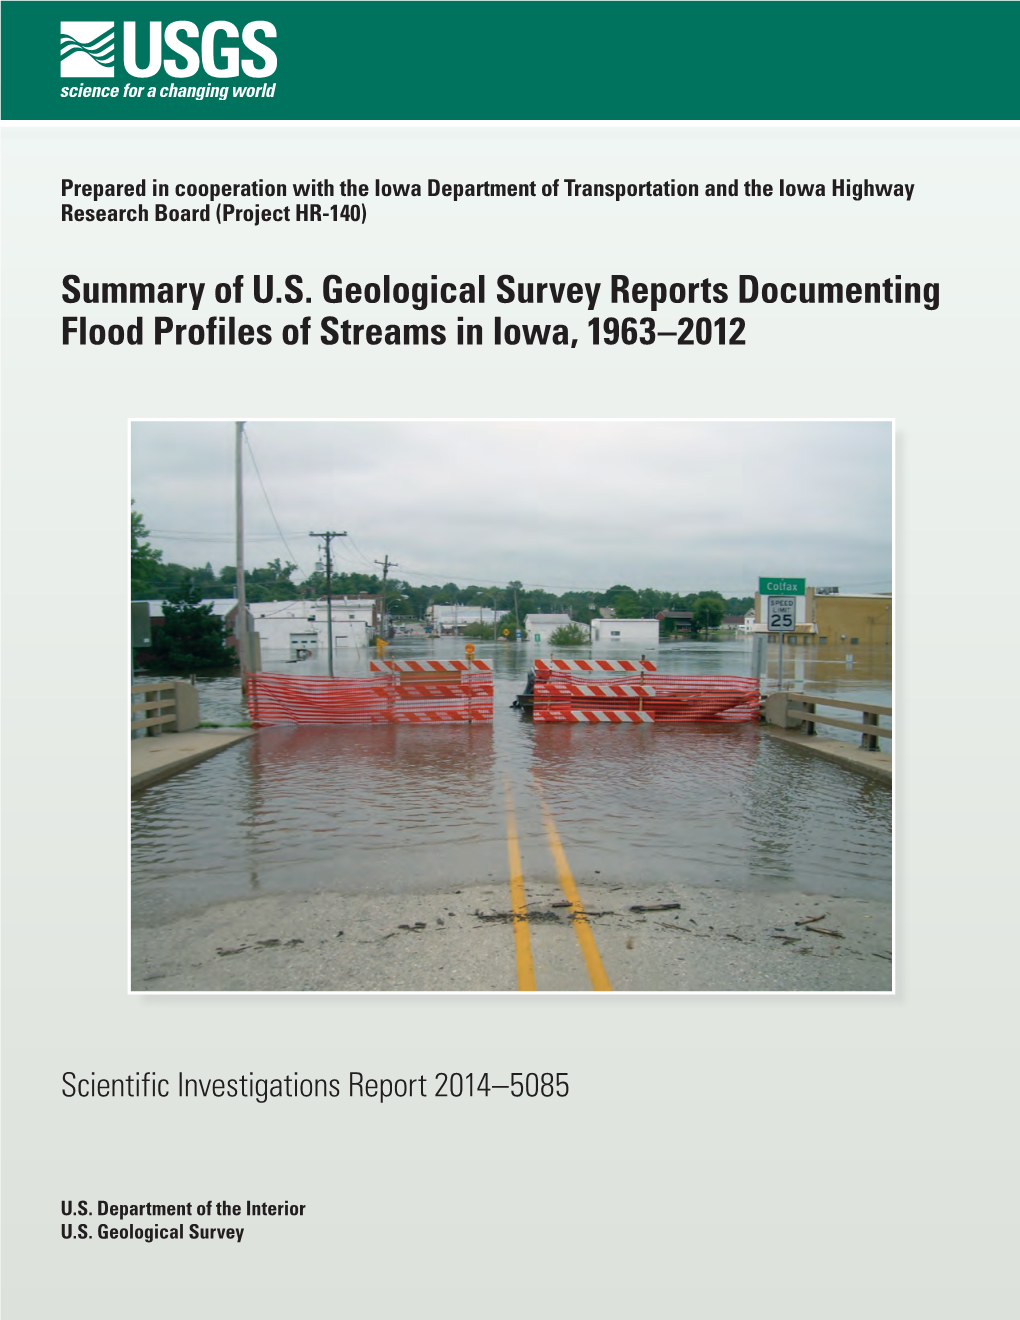 Summary of US Geological Survey Reports Documenting Flood